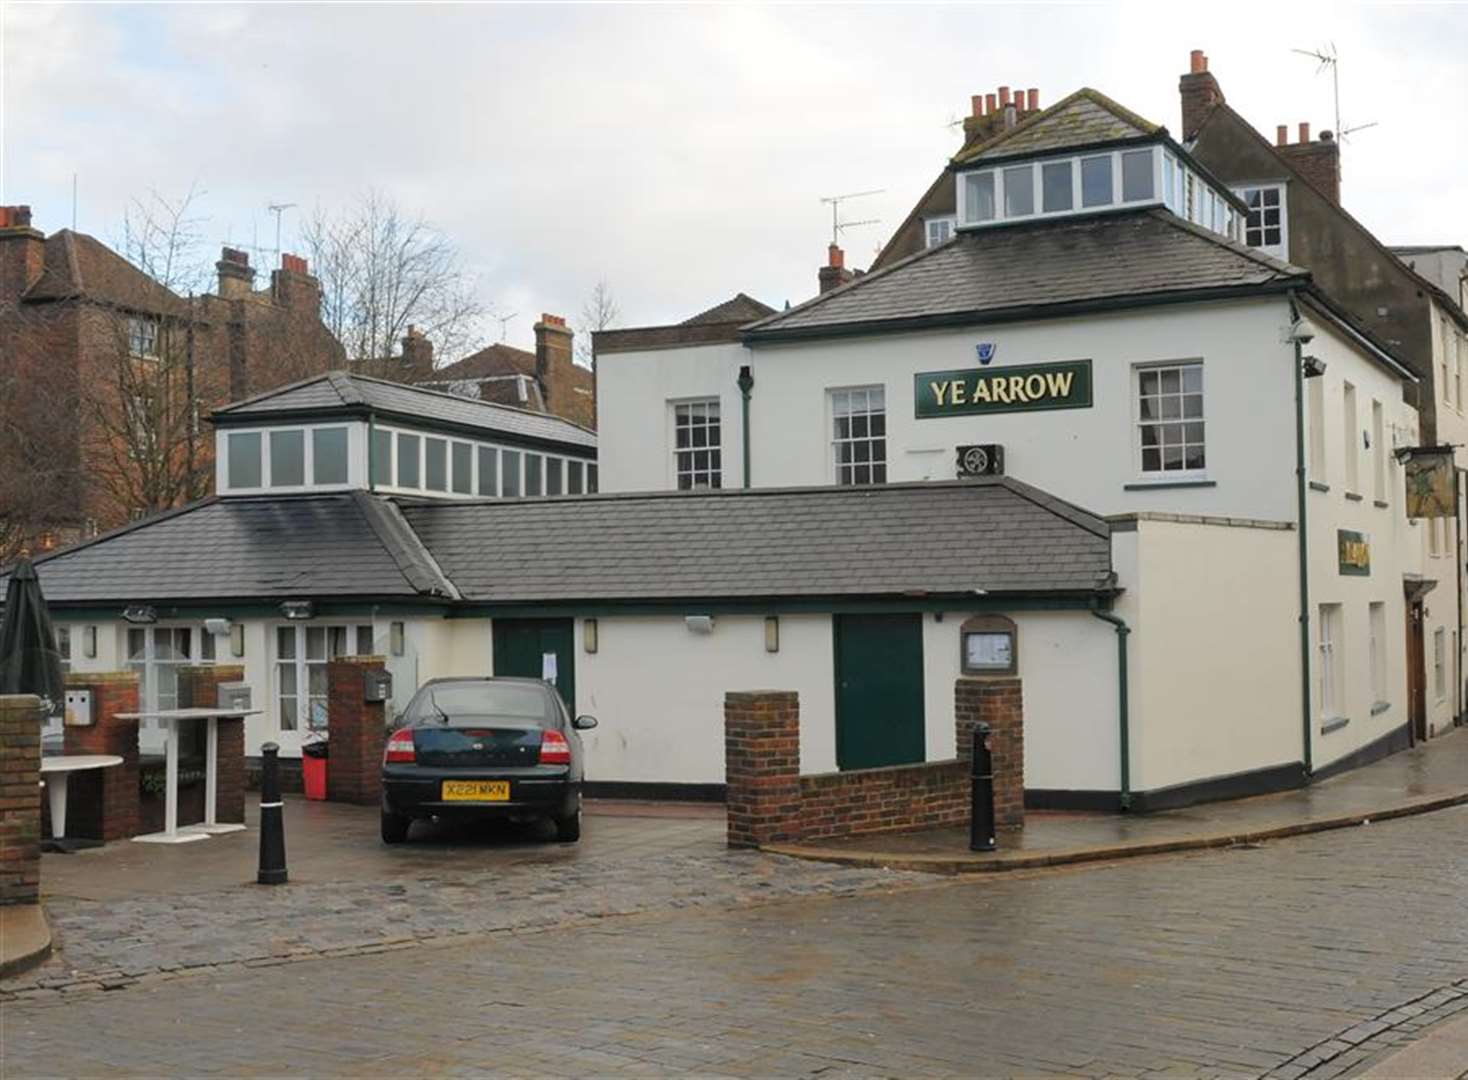 Pub re-opens after mouse infestation